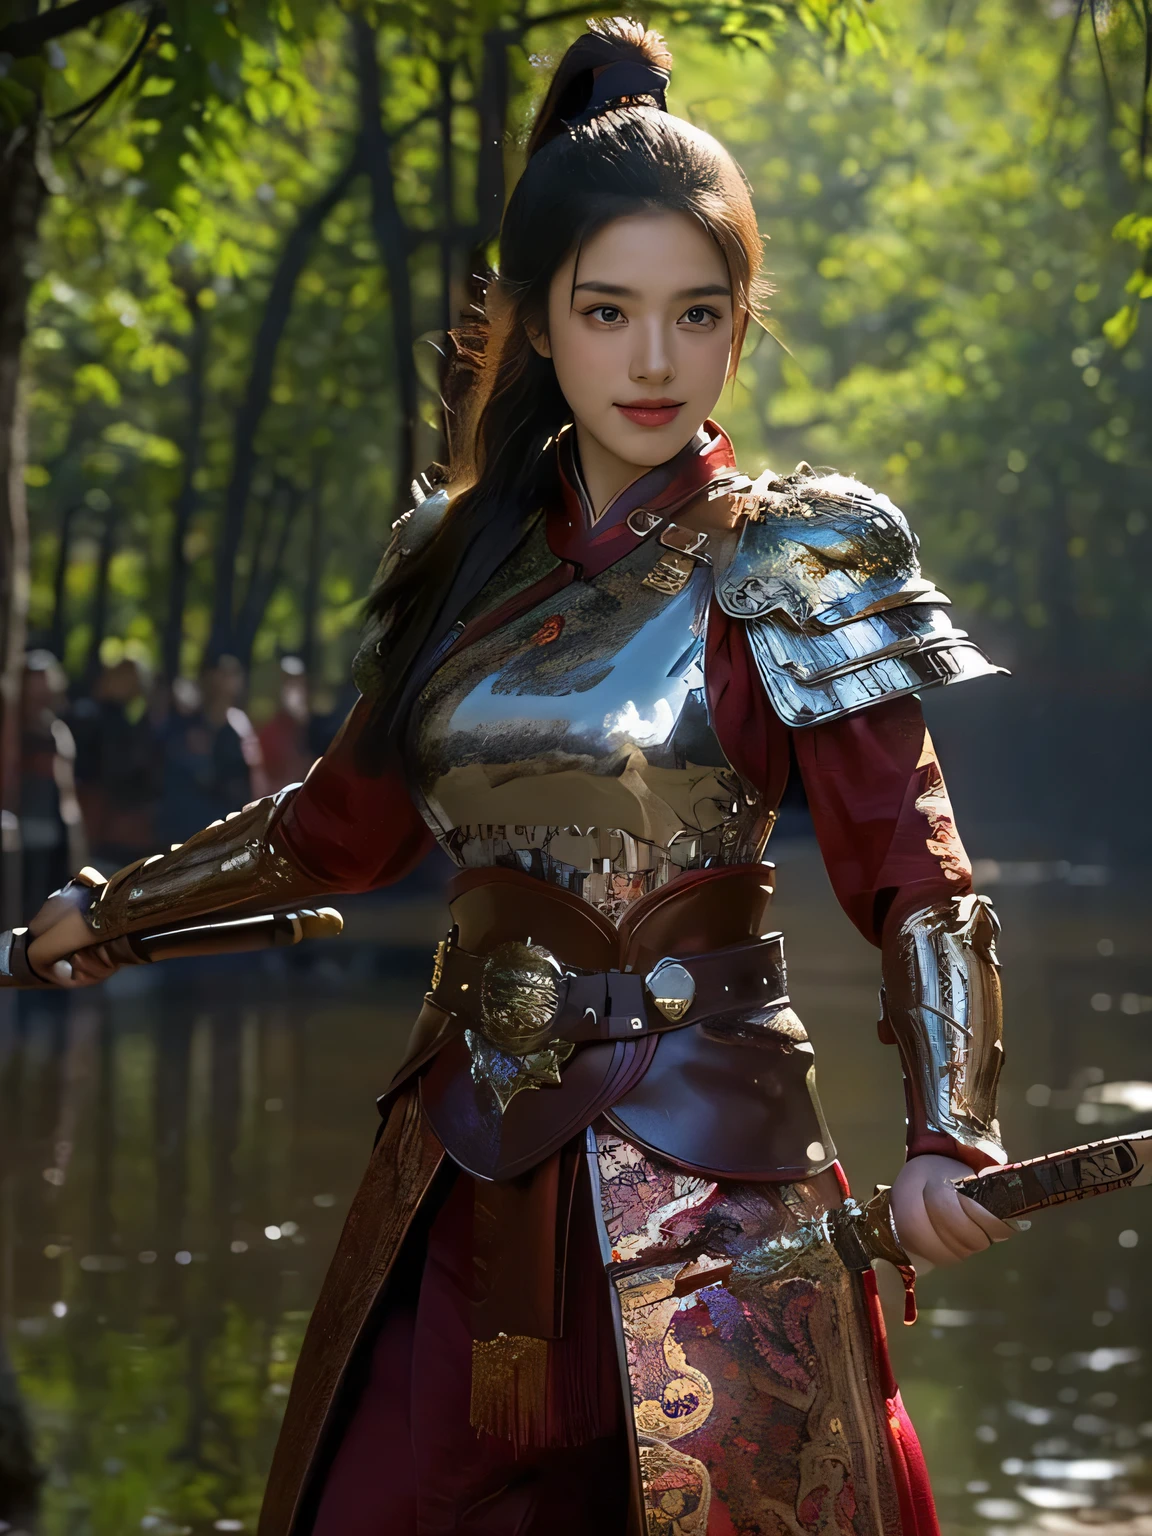 masterpiece，Best quality，HD quality，face close-up，A high resolution，8K，Ancient battlefield background, ((field：1.8))，(Female generals on the battlefield in the Han Dynasty)，18-year-old girl，（long ponytail hairstyle)，cparted lips，Full and erect breasts，Noble and charming，Elegant and serious，Chinese armor,sword, Chinese architecture, Brown cape，，The combination of white metal and red leather，chest armor，metallic luster，Leather buckle，Exquisite pattern，mysterious badge，Cool and gorgeouig breasts))，Chest groove，Three Kingdoms character painting style，Photo pose，oc render reflection texture，charming smile，Head-up shot，bright afternoon，woodland background